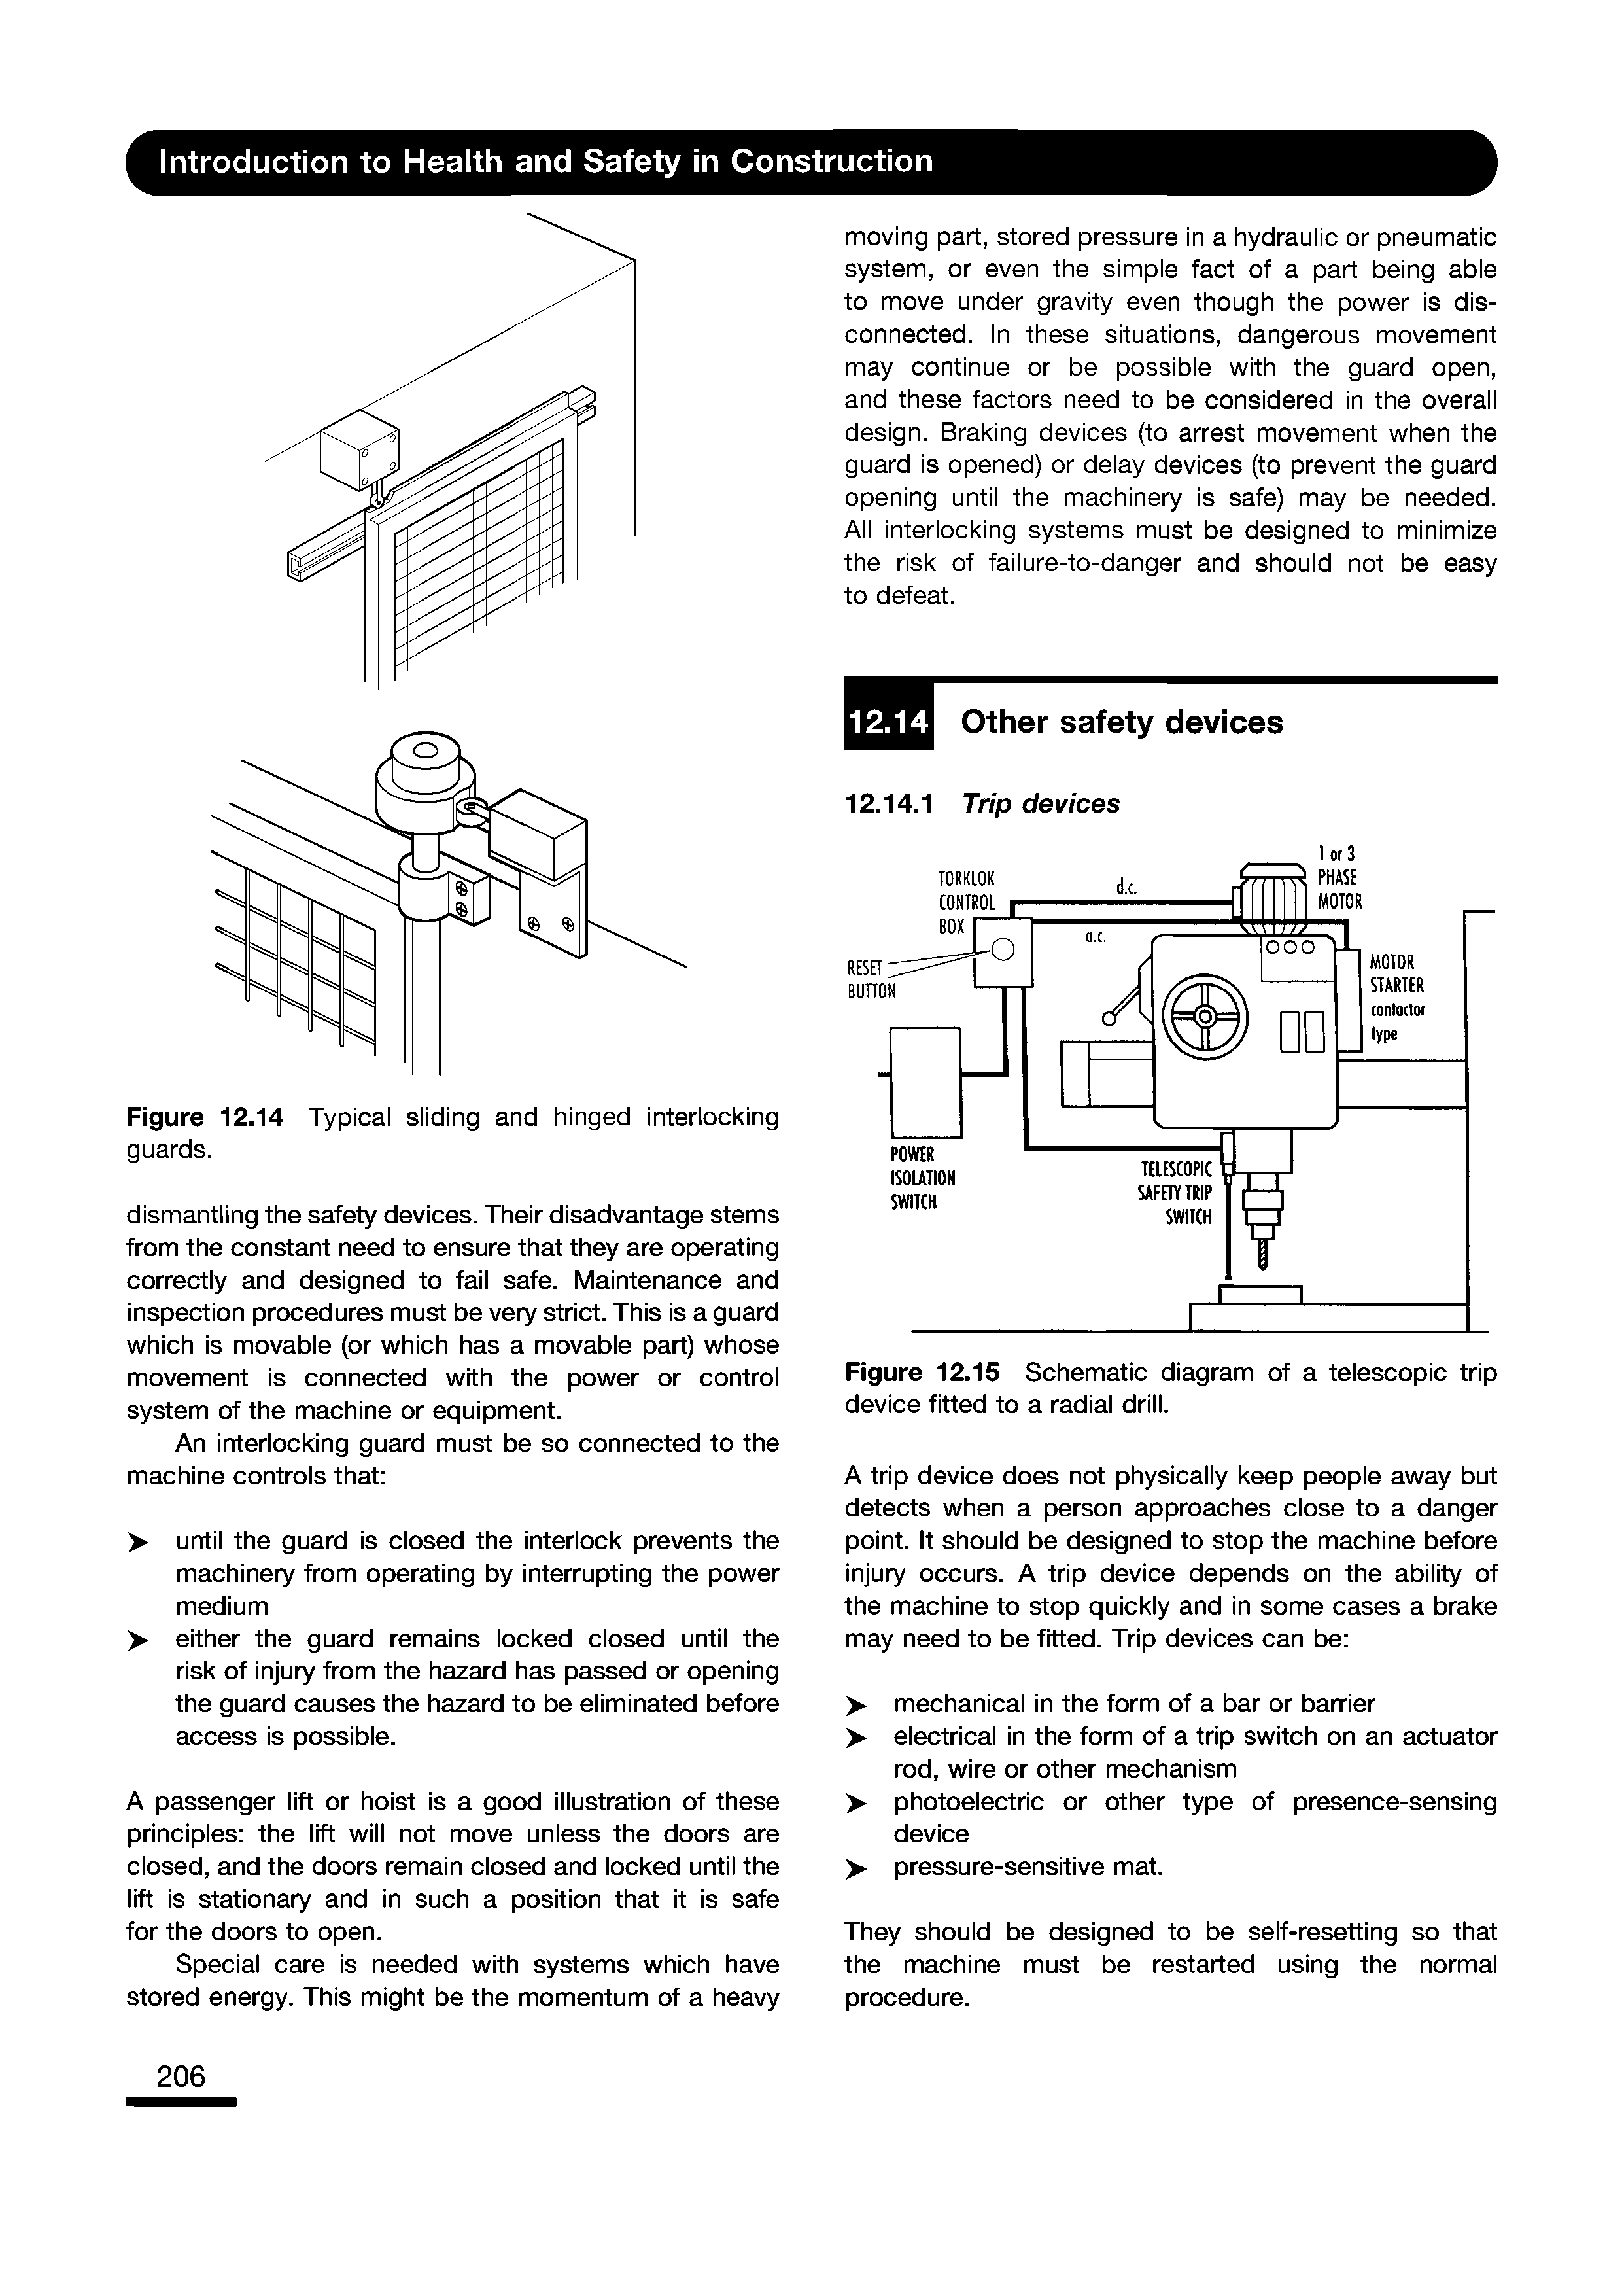 Figure 12.15 Schematic diagram of a telescopic trip device fitted to a radial drill.